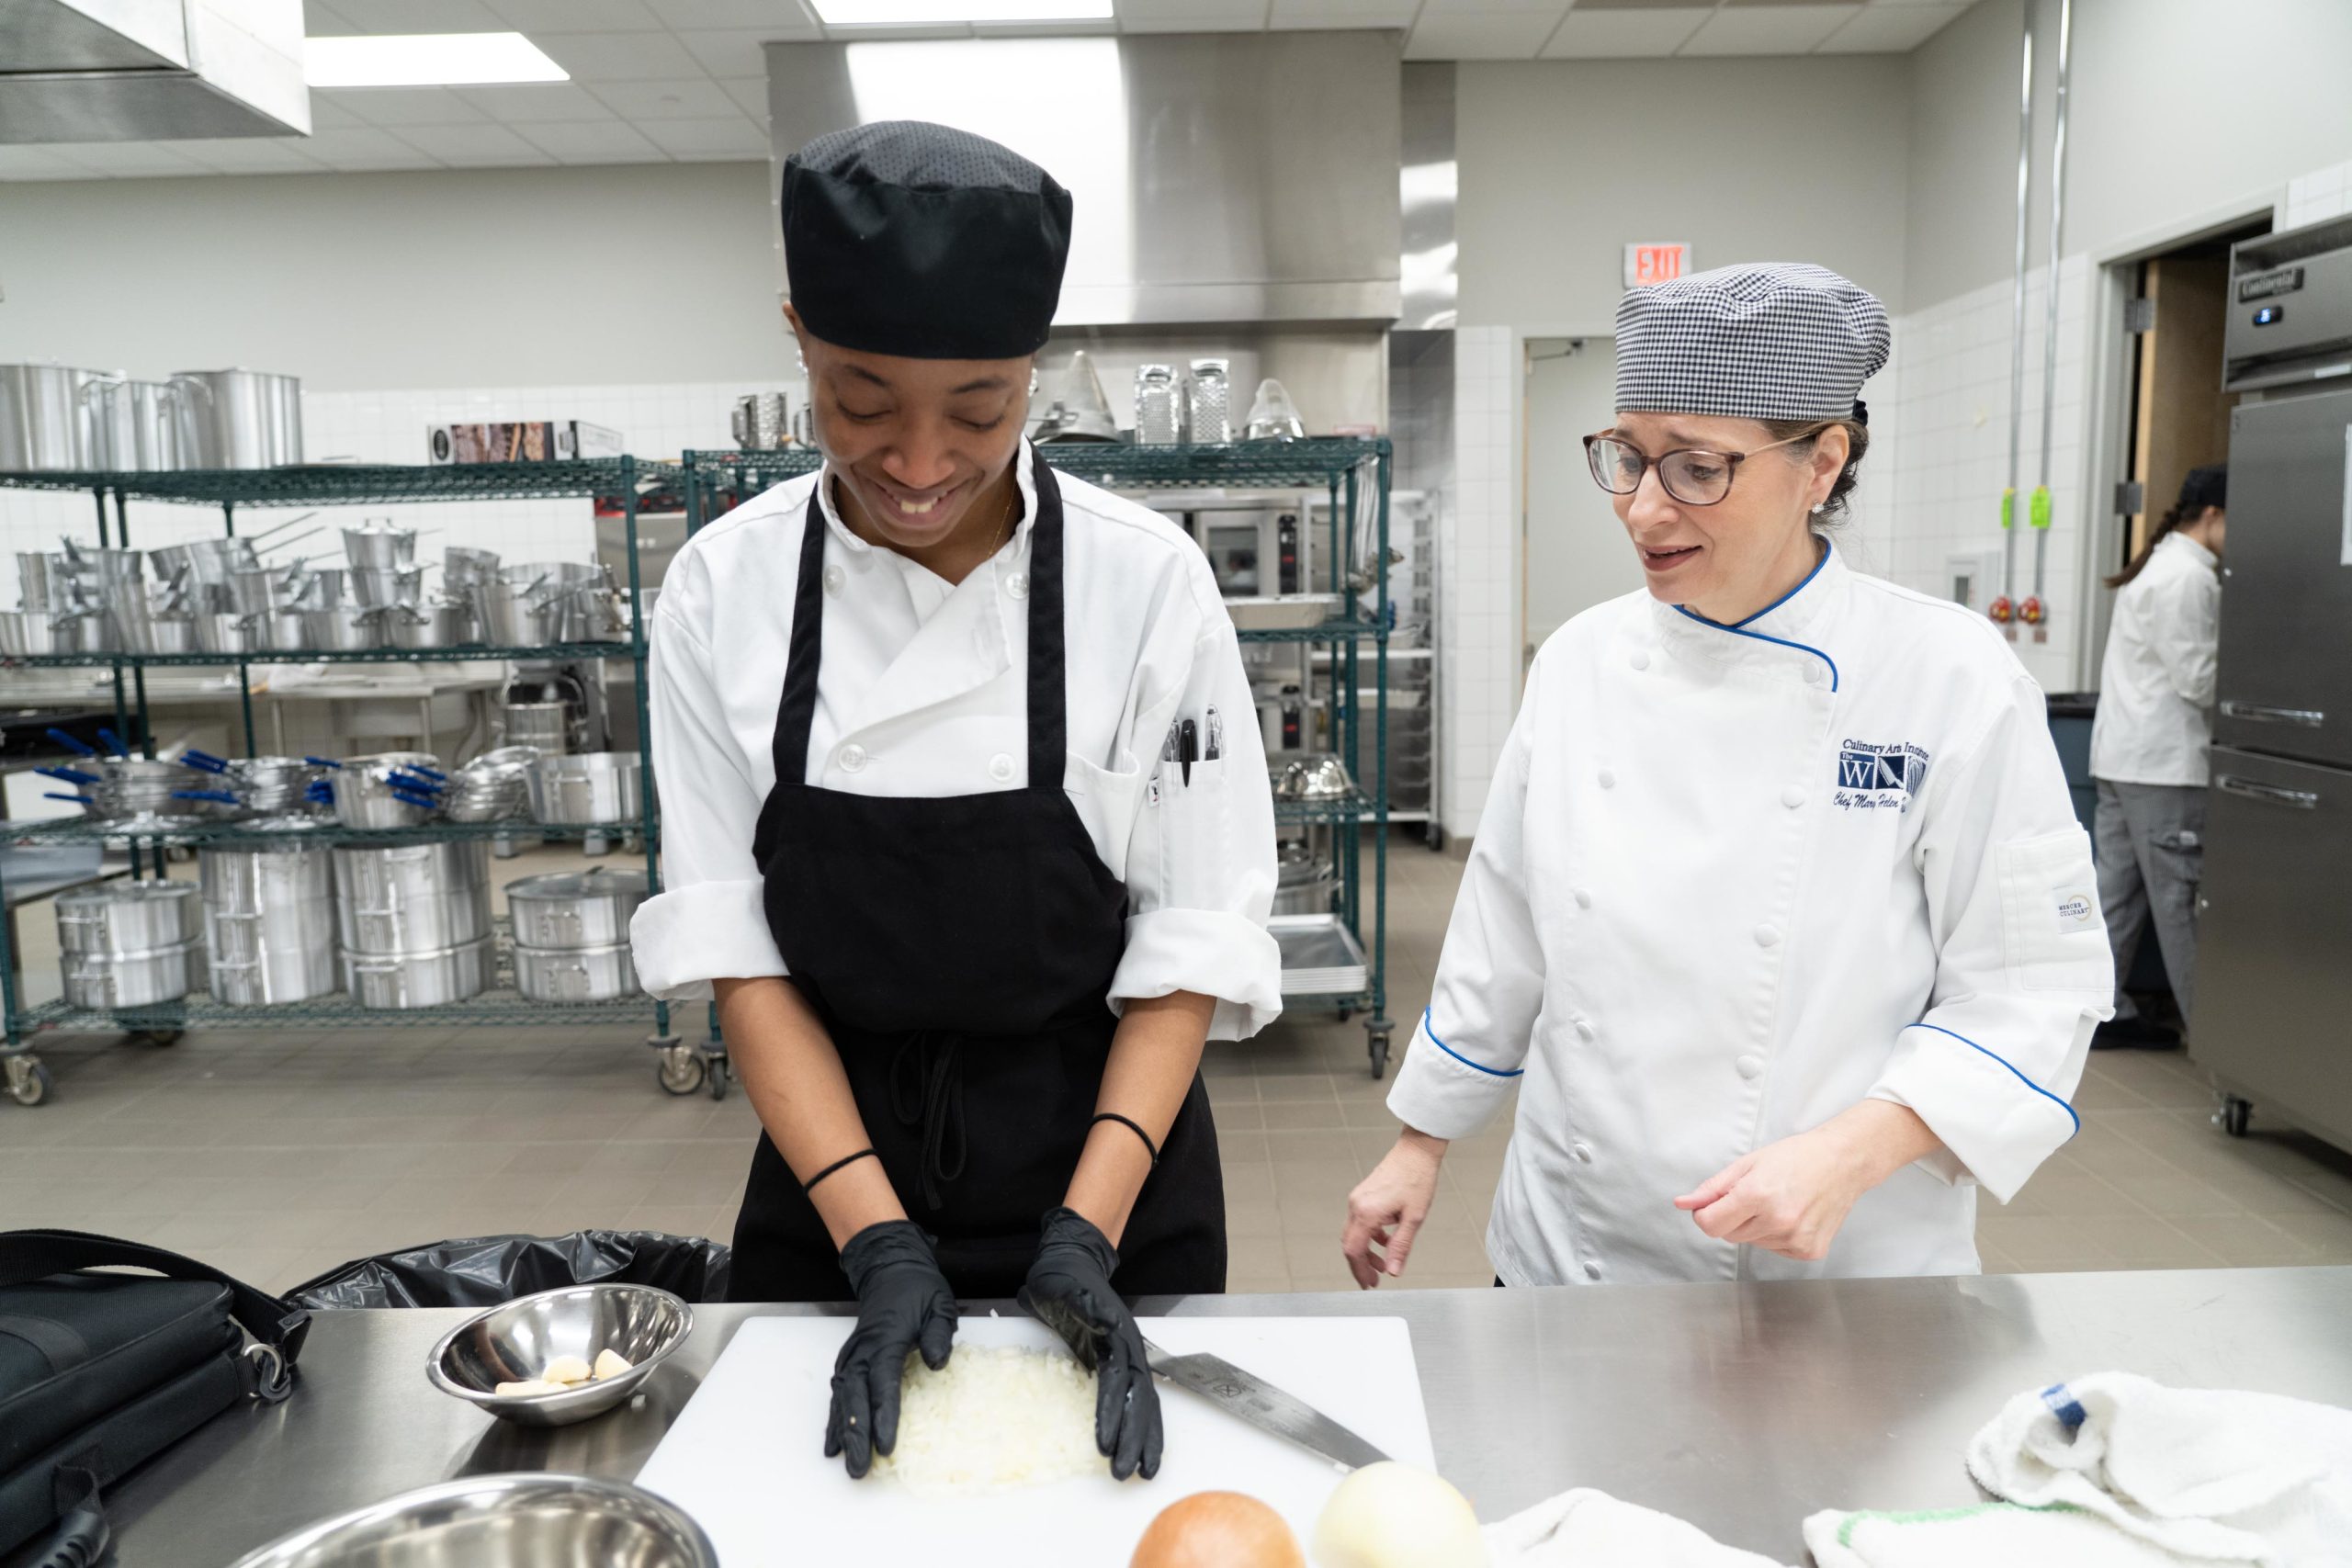 Culinary Discovery Day brings 100 aspiring chefs to The W